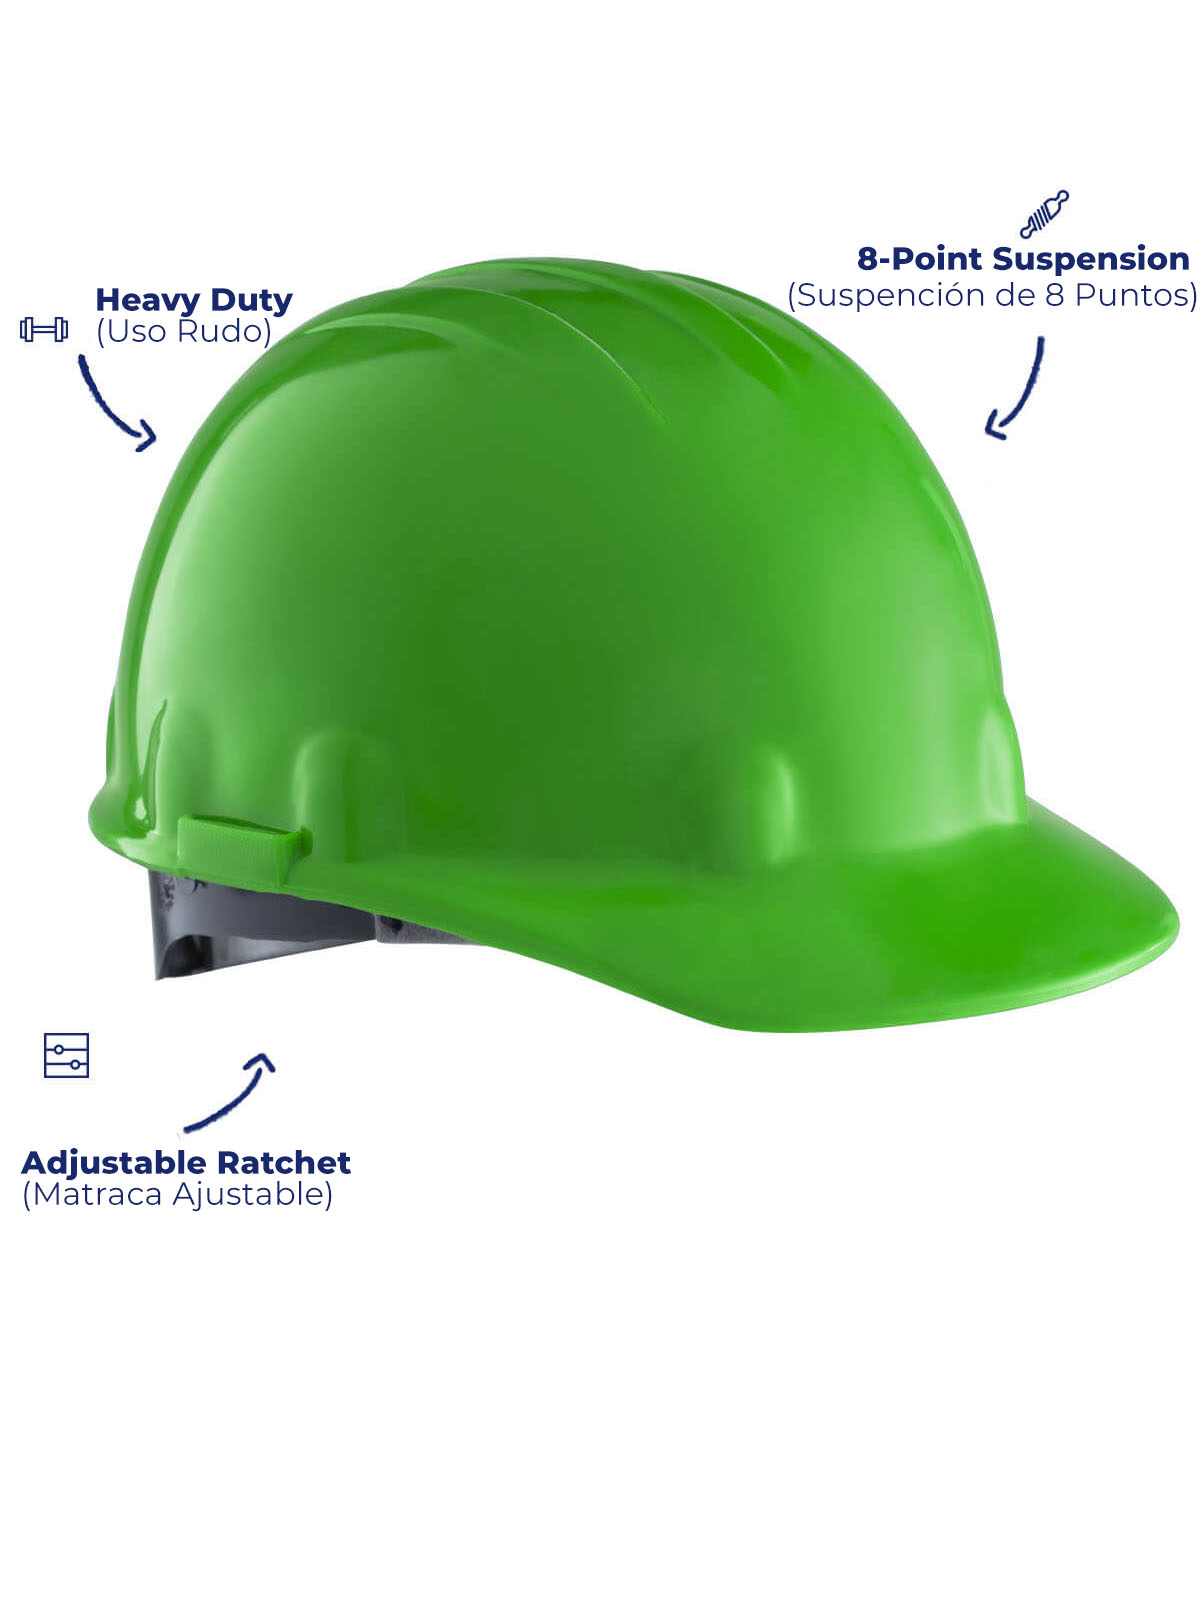 Green safety helmet for construction